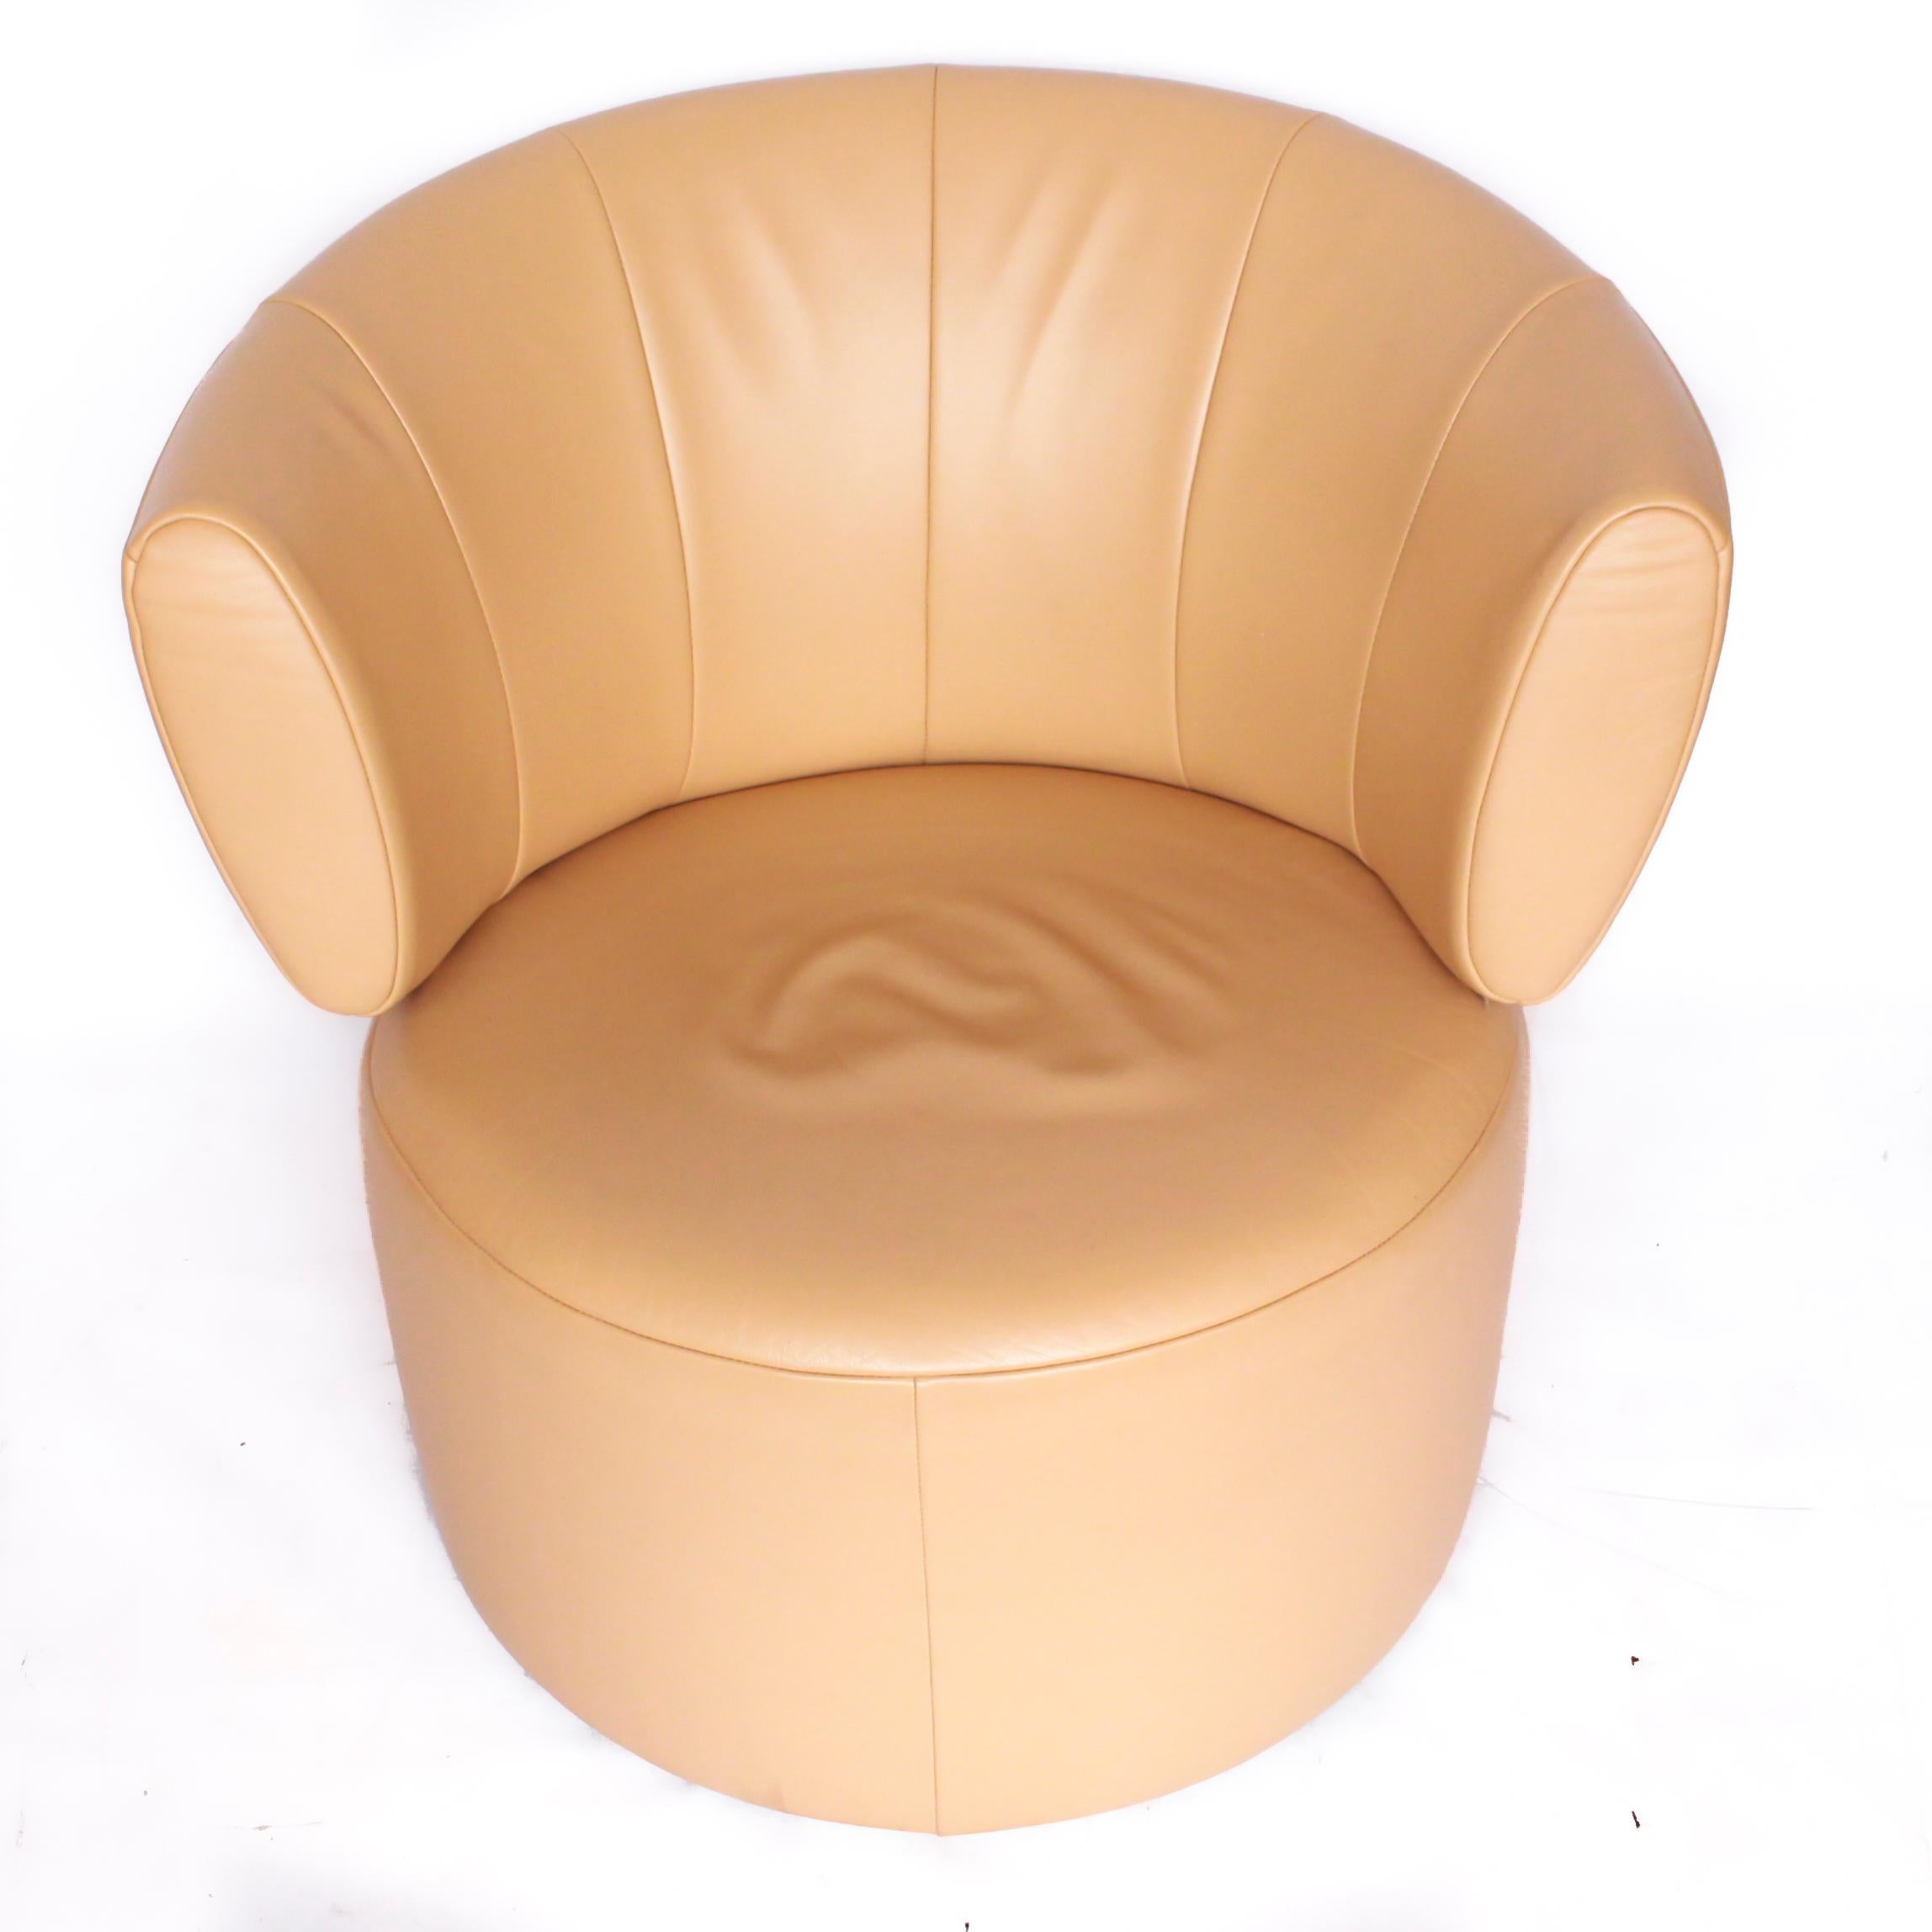 Late 20th Century Pair of Rolf Benz 684 Armchairs Cream Leather Wooden Base Swivel Movement